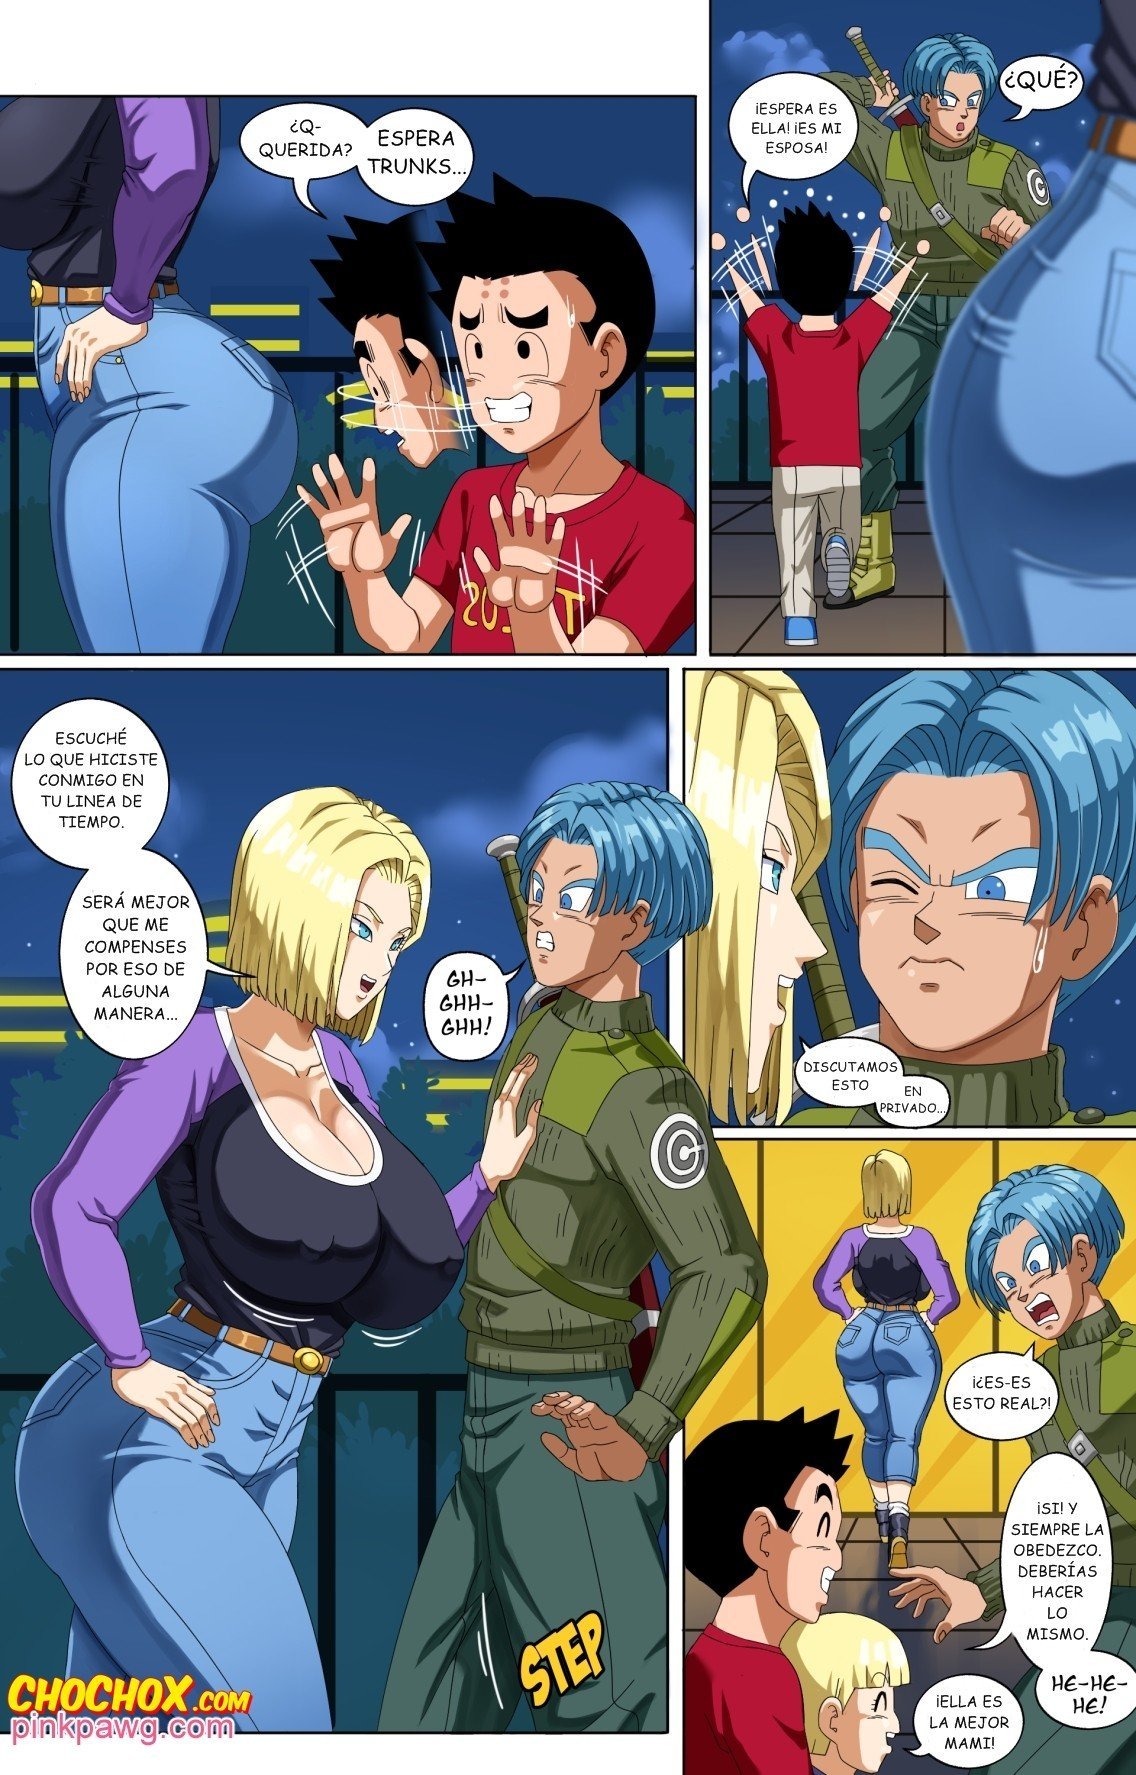 Android 18 and Trunks – PinkPawg - 1